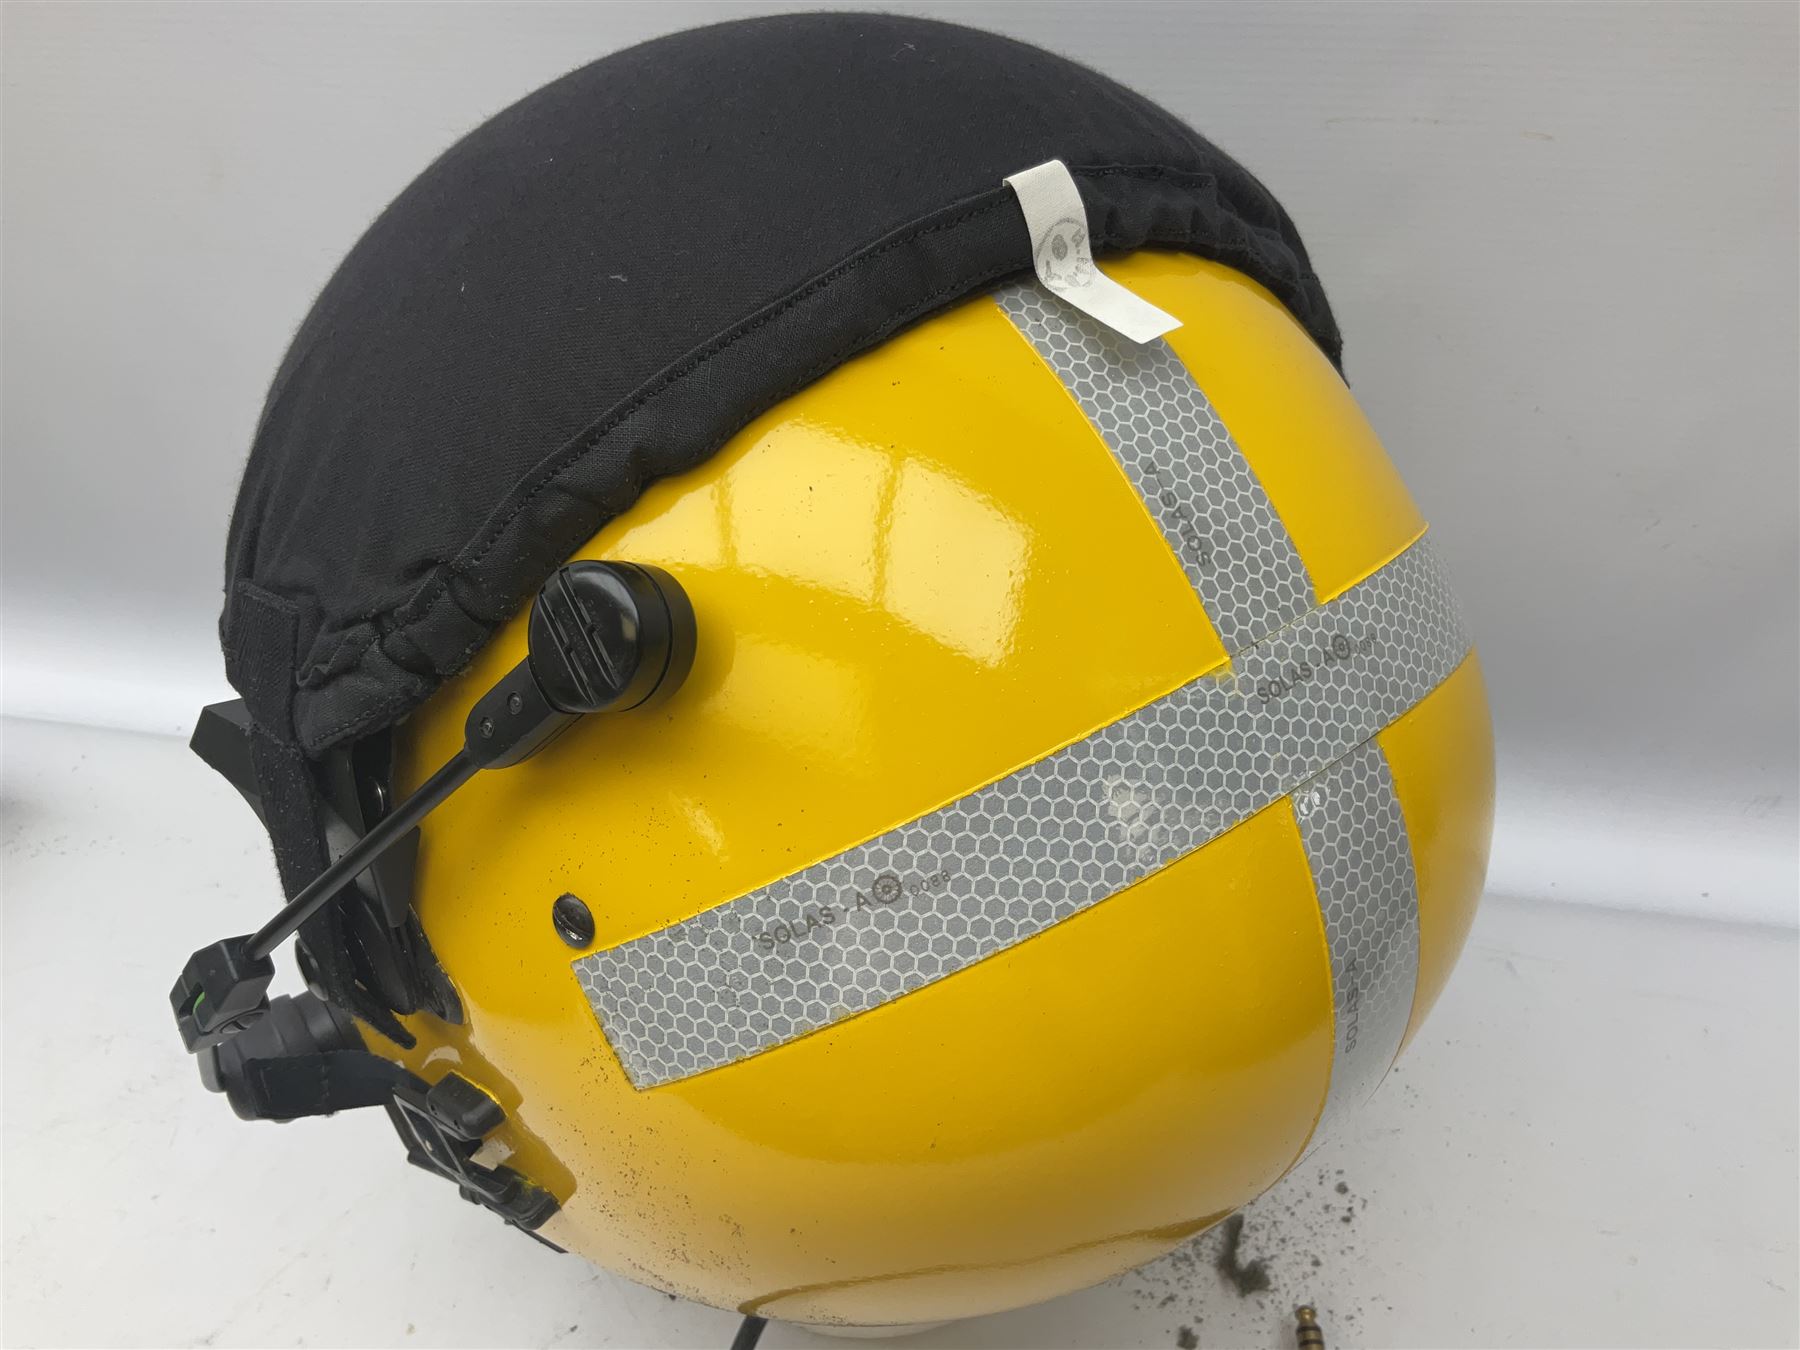 Search and Rescue Mark IV/IVA Flying helmet with boom microphone - Image 10 of 32